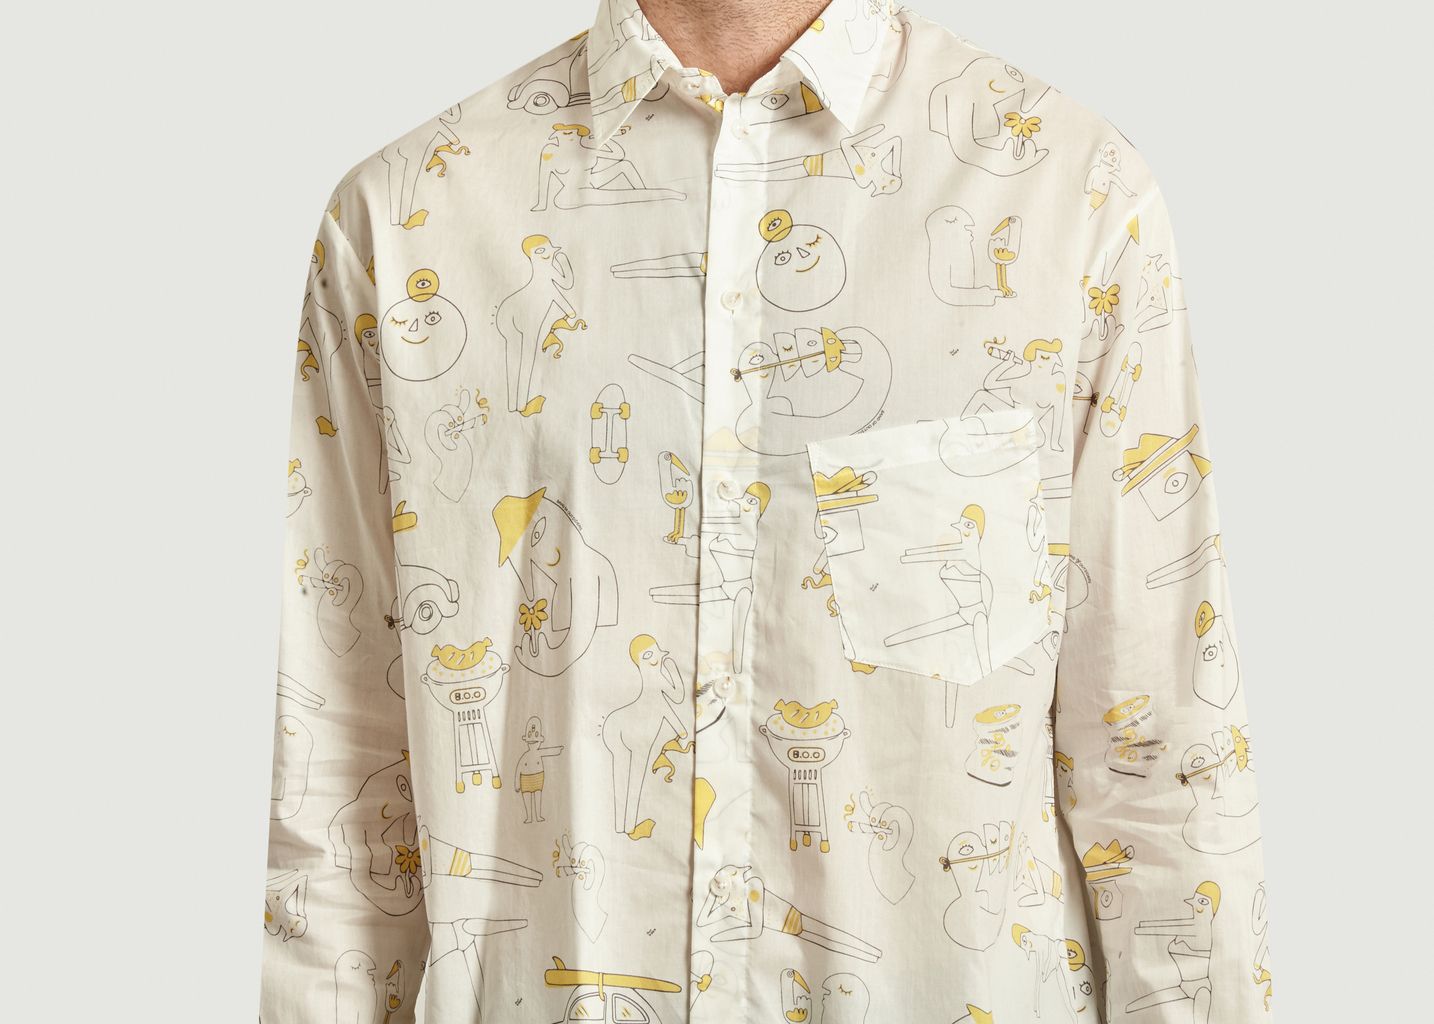 Chemise à imprimé abstrait Band Of Outsiders x Amit  - Band Of Outsiders